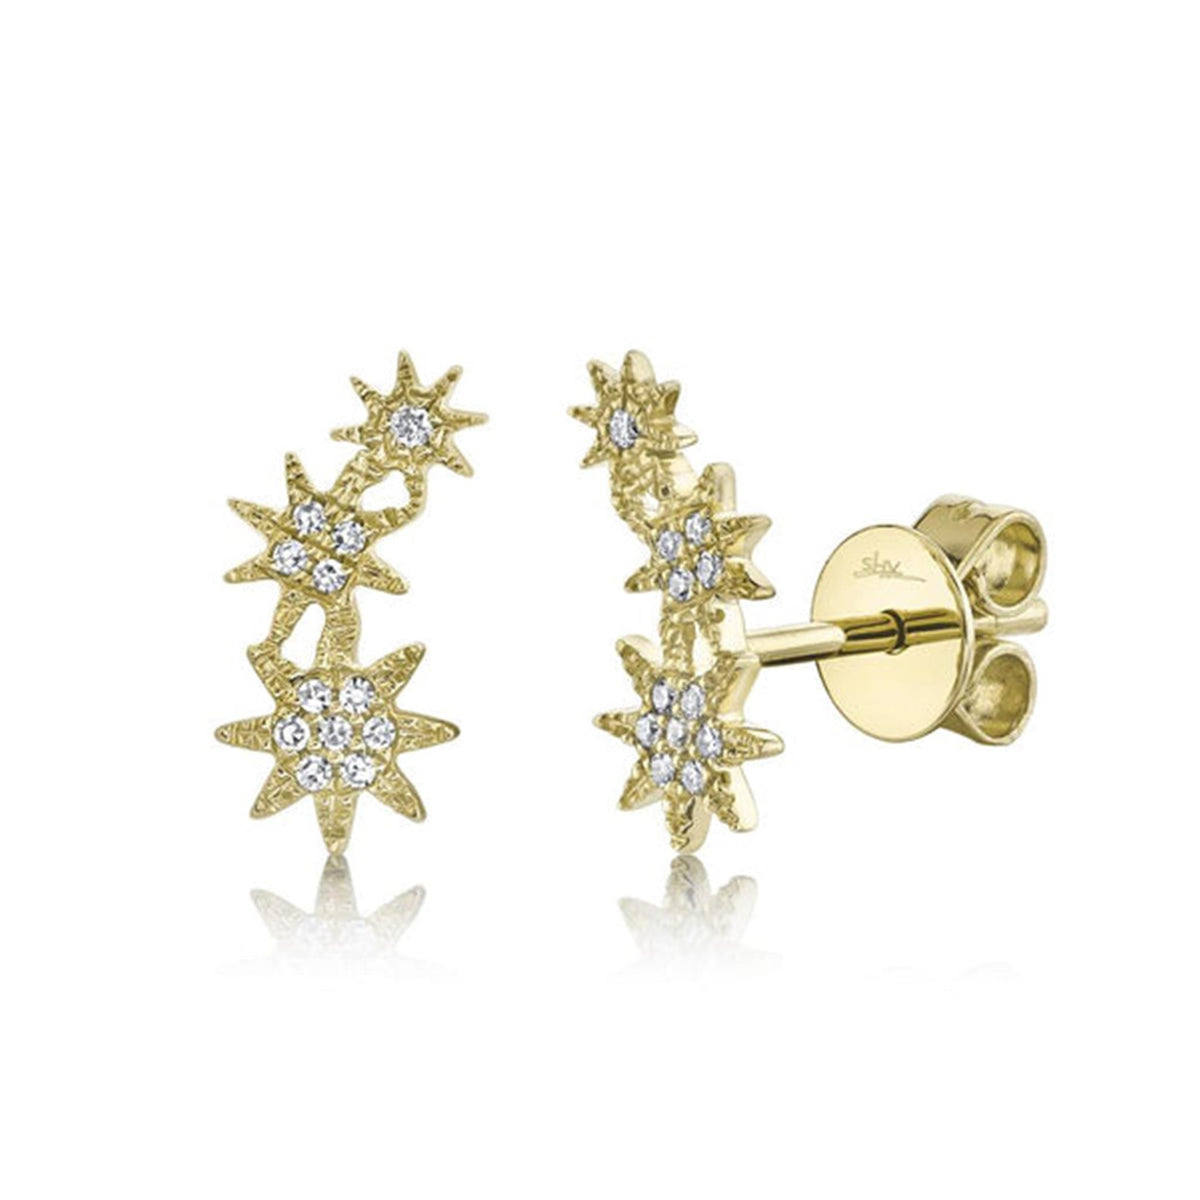 Shy Creation 14Kt Yellow Gold Starburst Earrings 0.06cttw Natural Diamonds